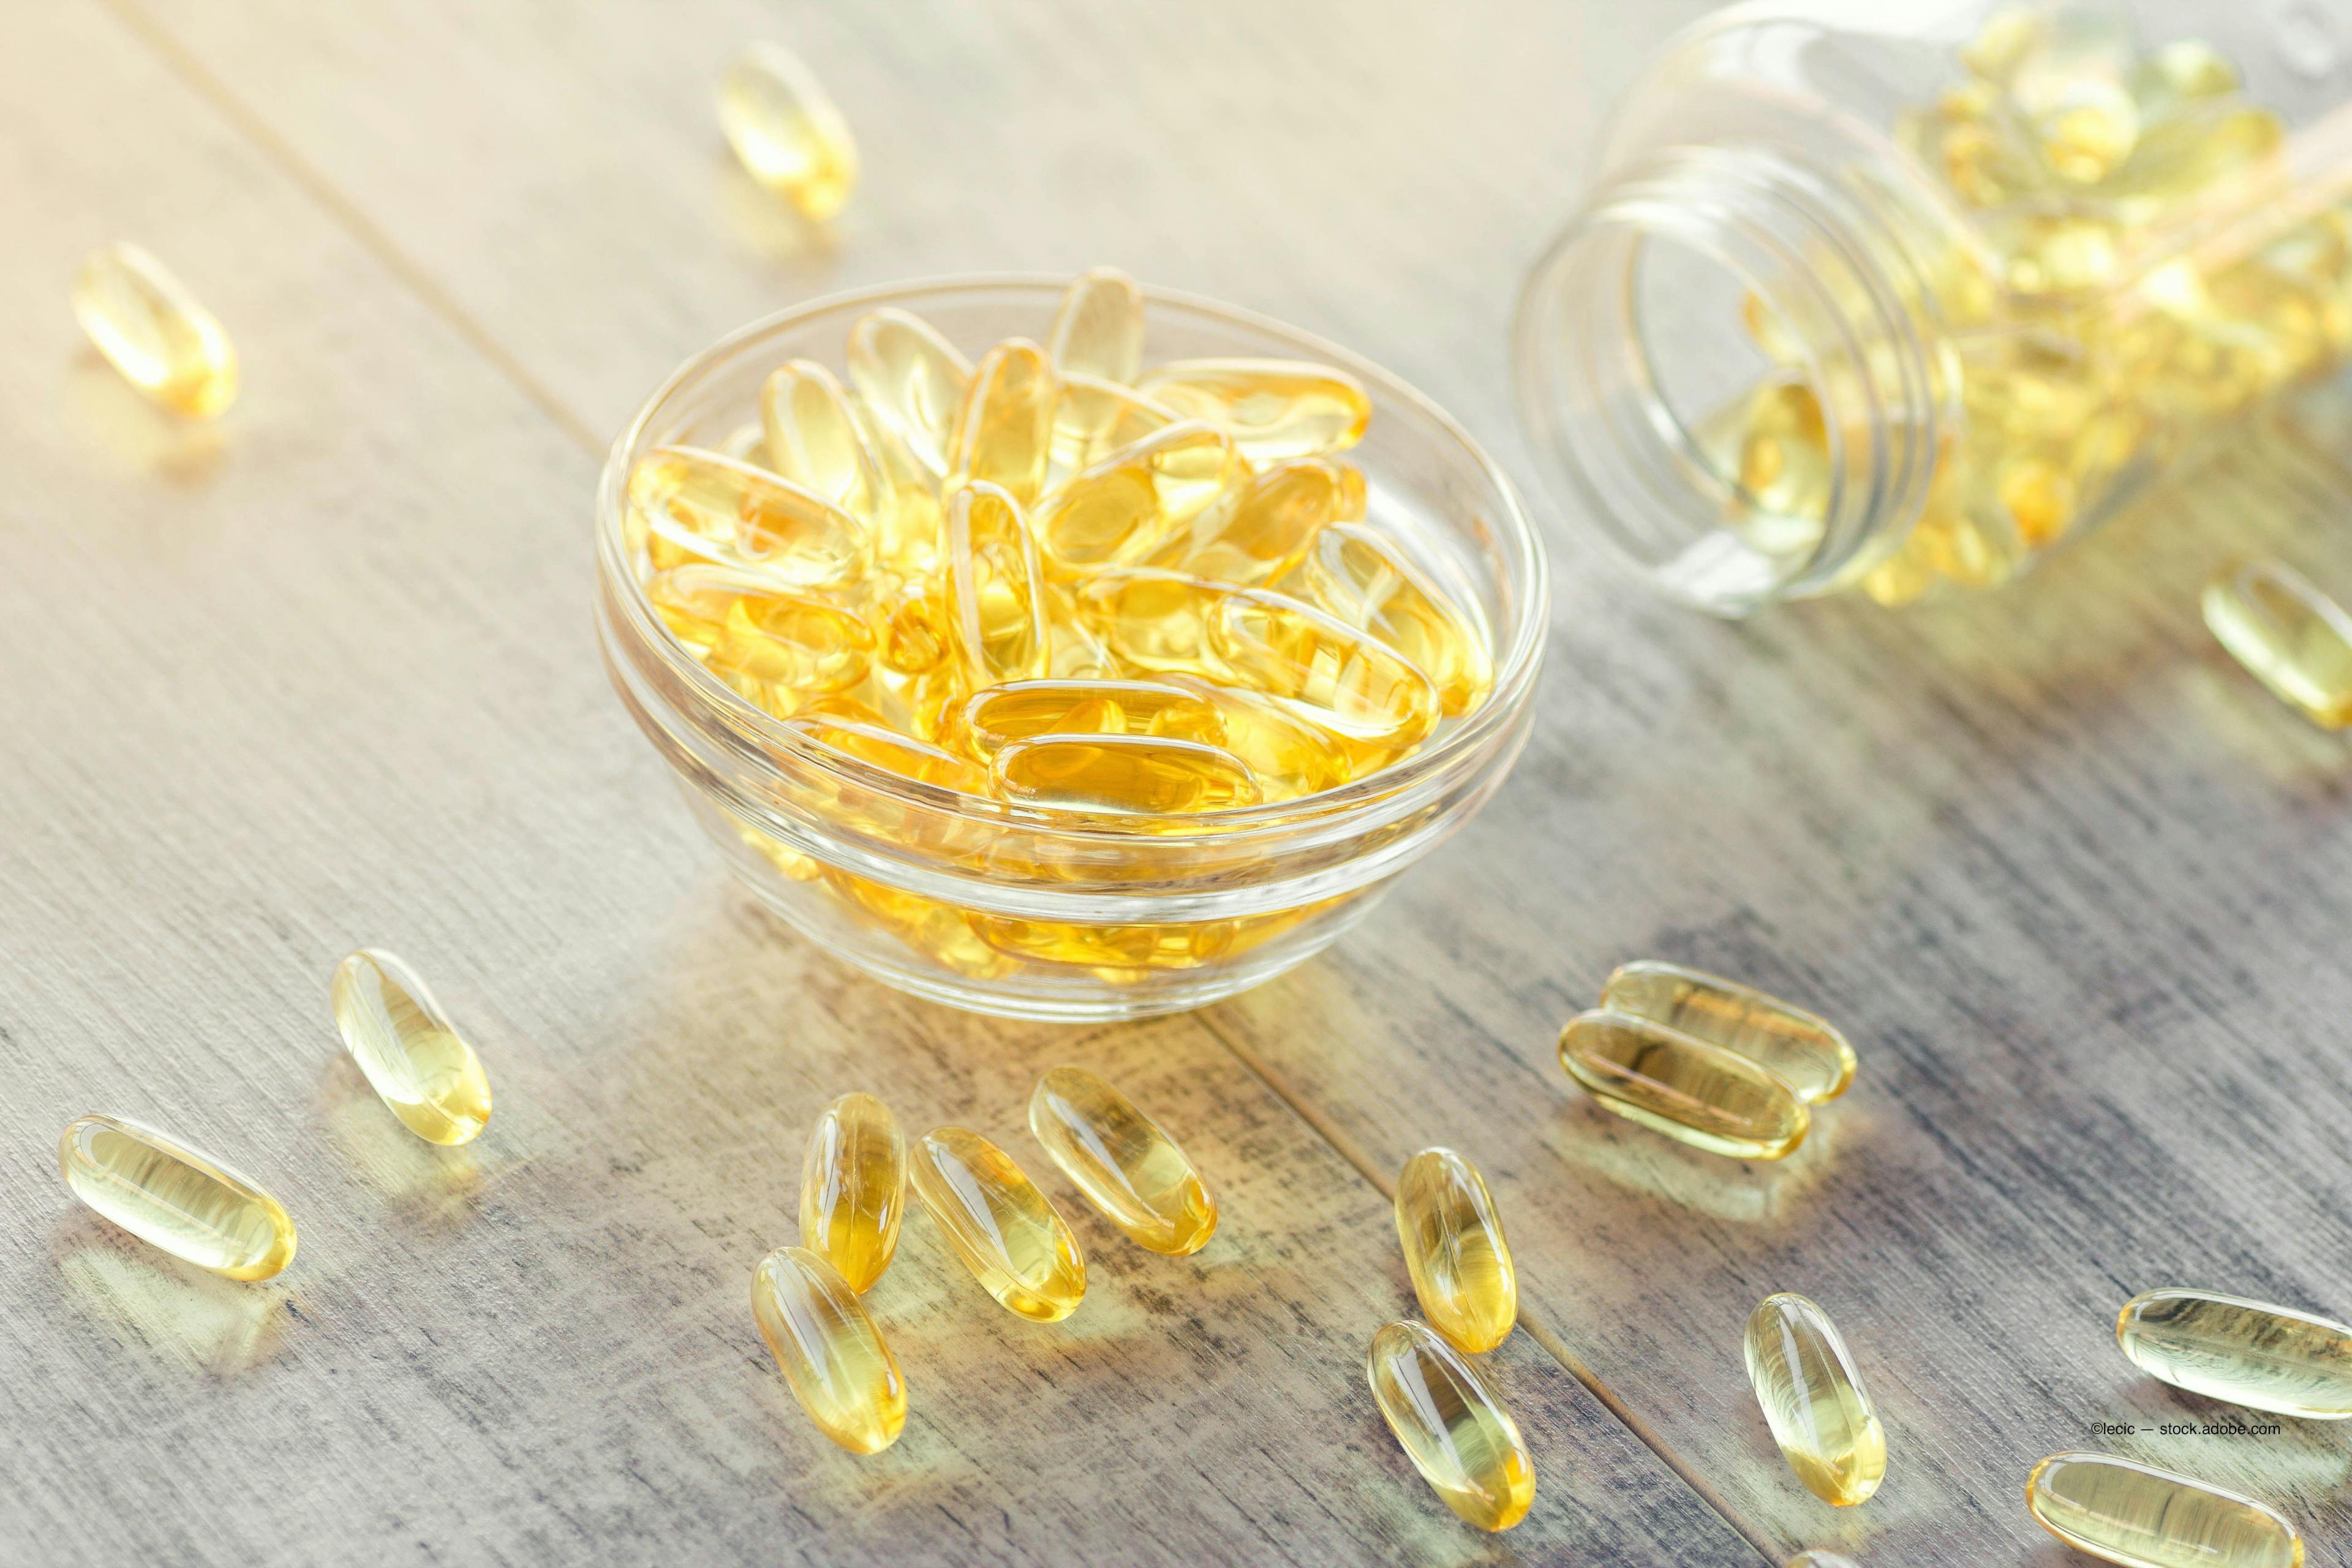 Omega-3s no better than placebo for dry eye